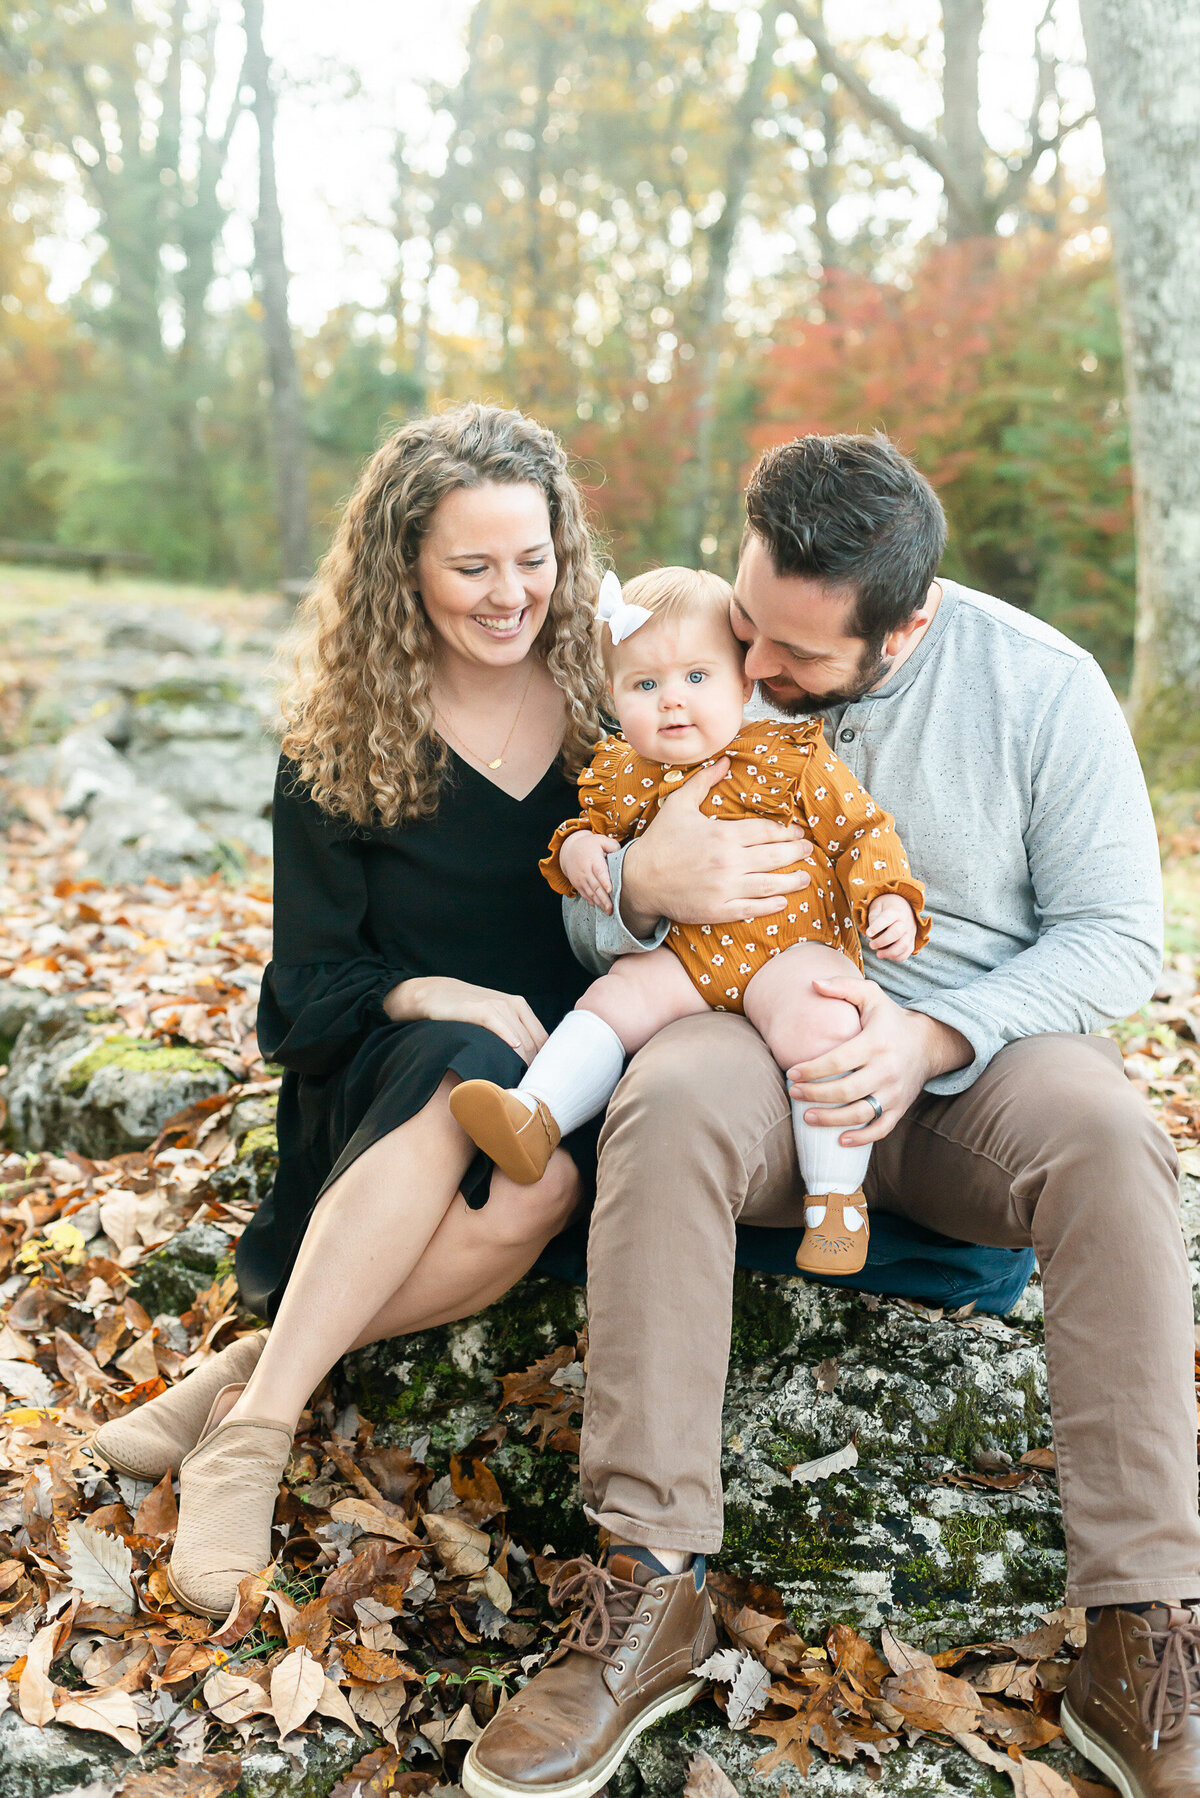 KY Photographer: Portrait of a mother and father holding their daughter and looking at her in fall.